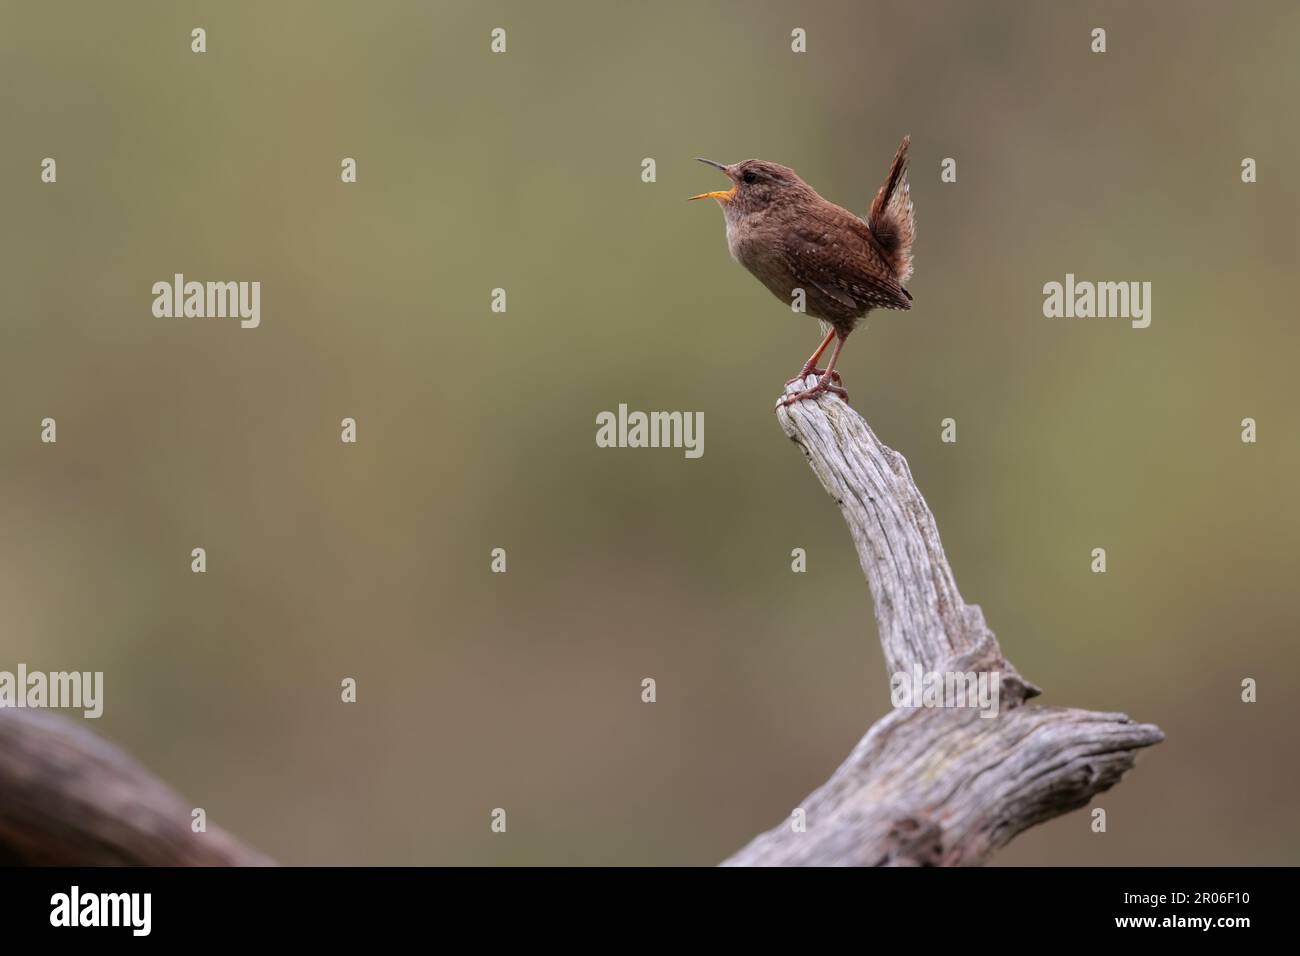 Wren troglodytes singing from dead branch small bird brown fine barred plumage cocked tail copy space soft background late spring breeding season uk Stock Photo